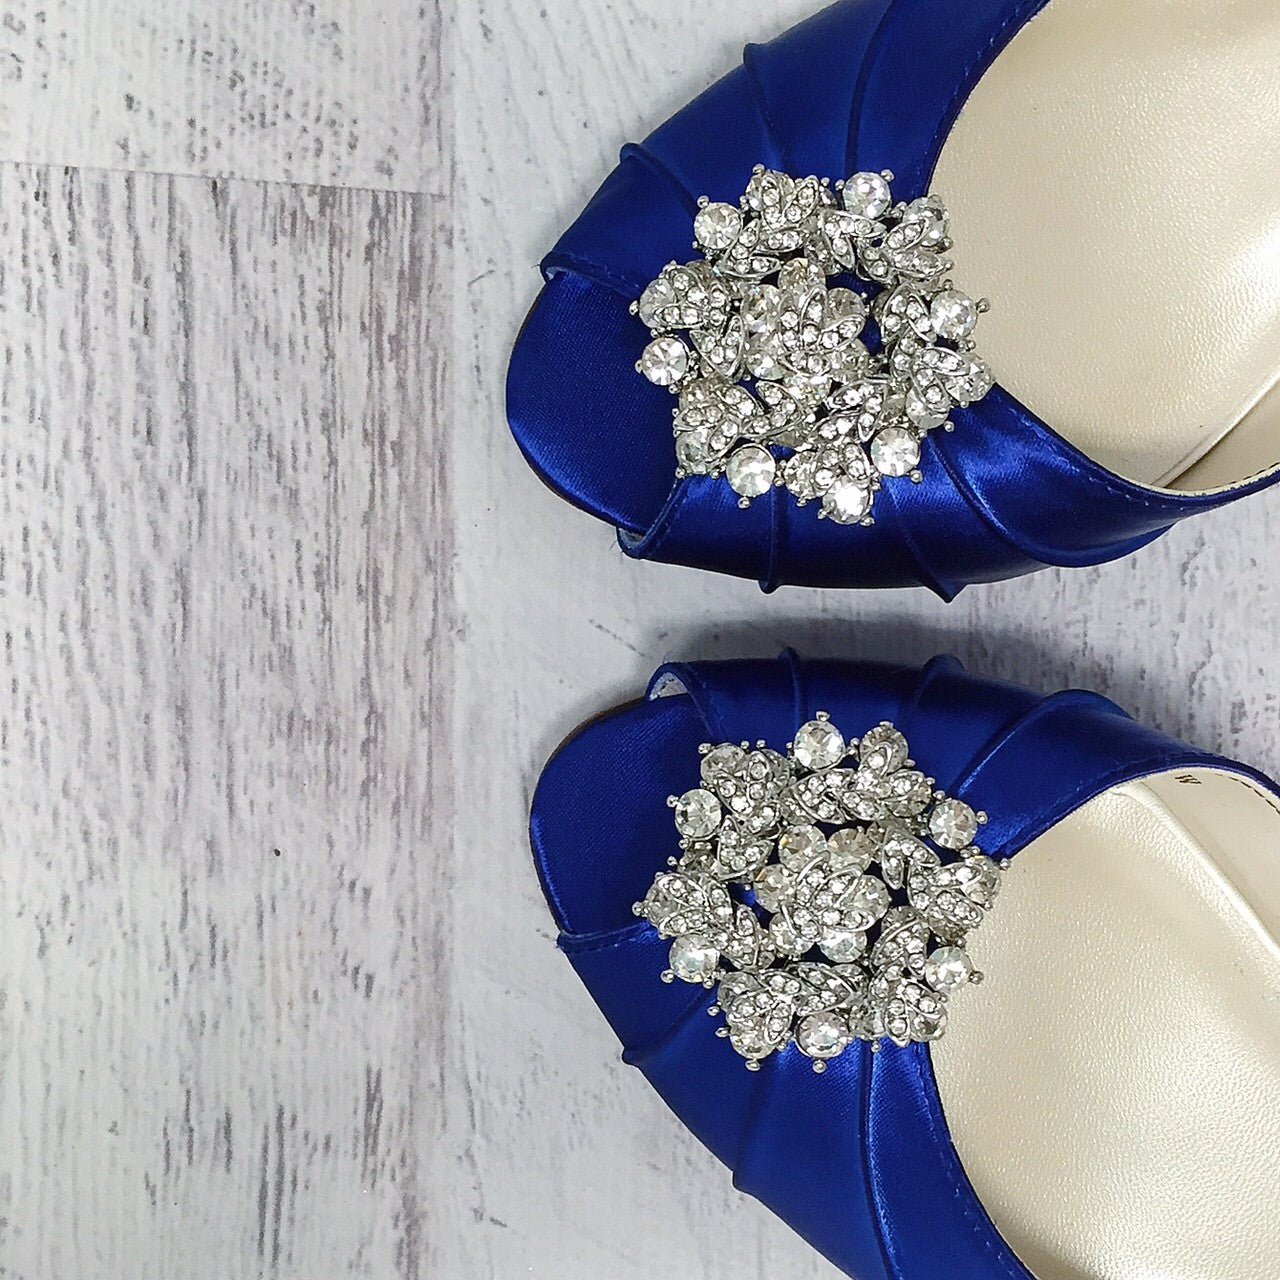 How Much To Spend On Wedding Shoes To Get The Perfect Pair?